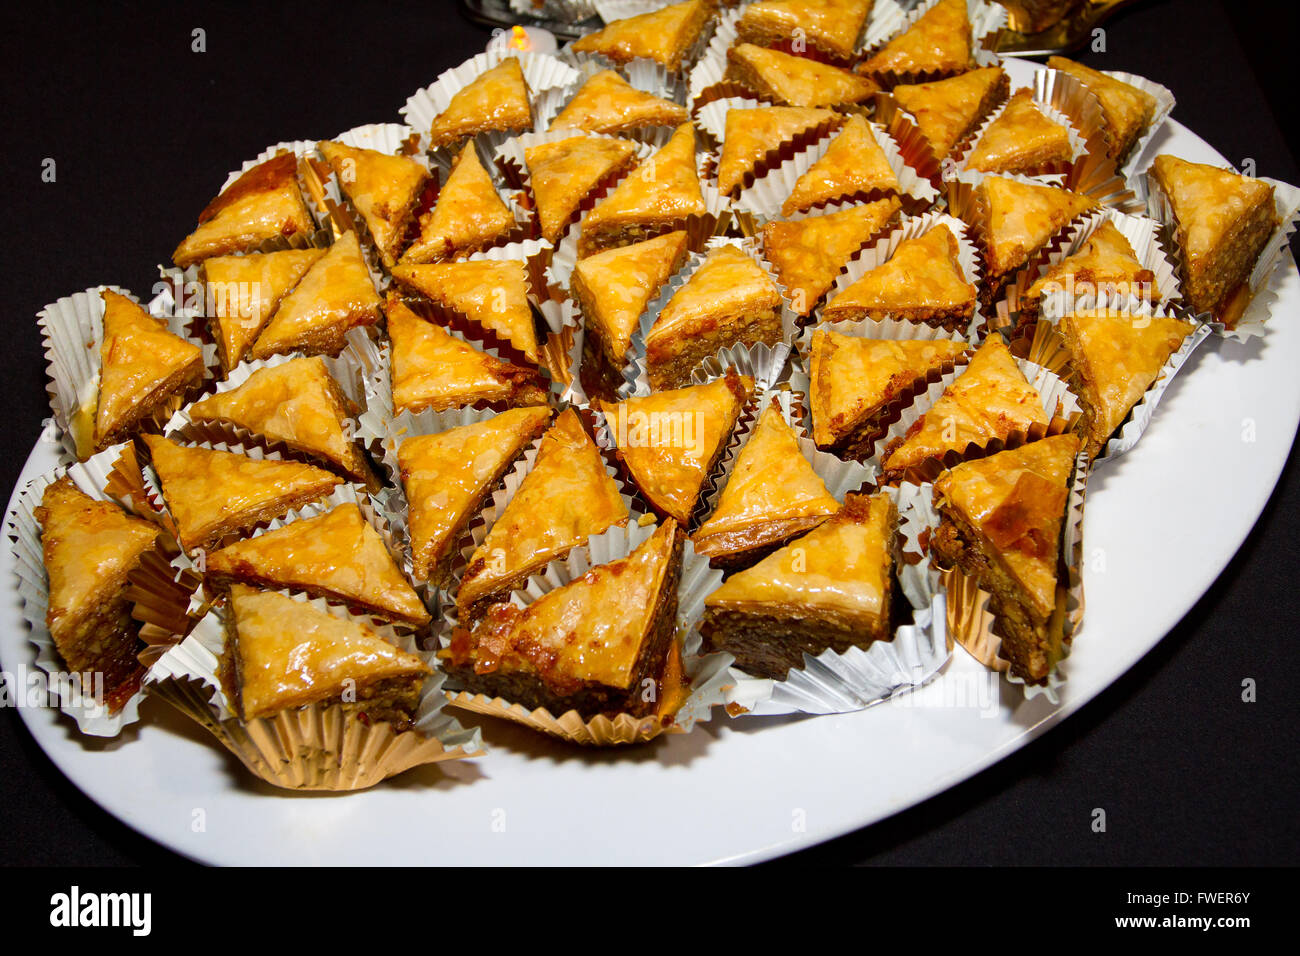 The Greek dessert baklava is individually wrapped and set on a platter at a wedding reception. Stock Photo